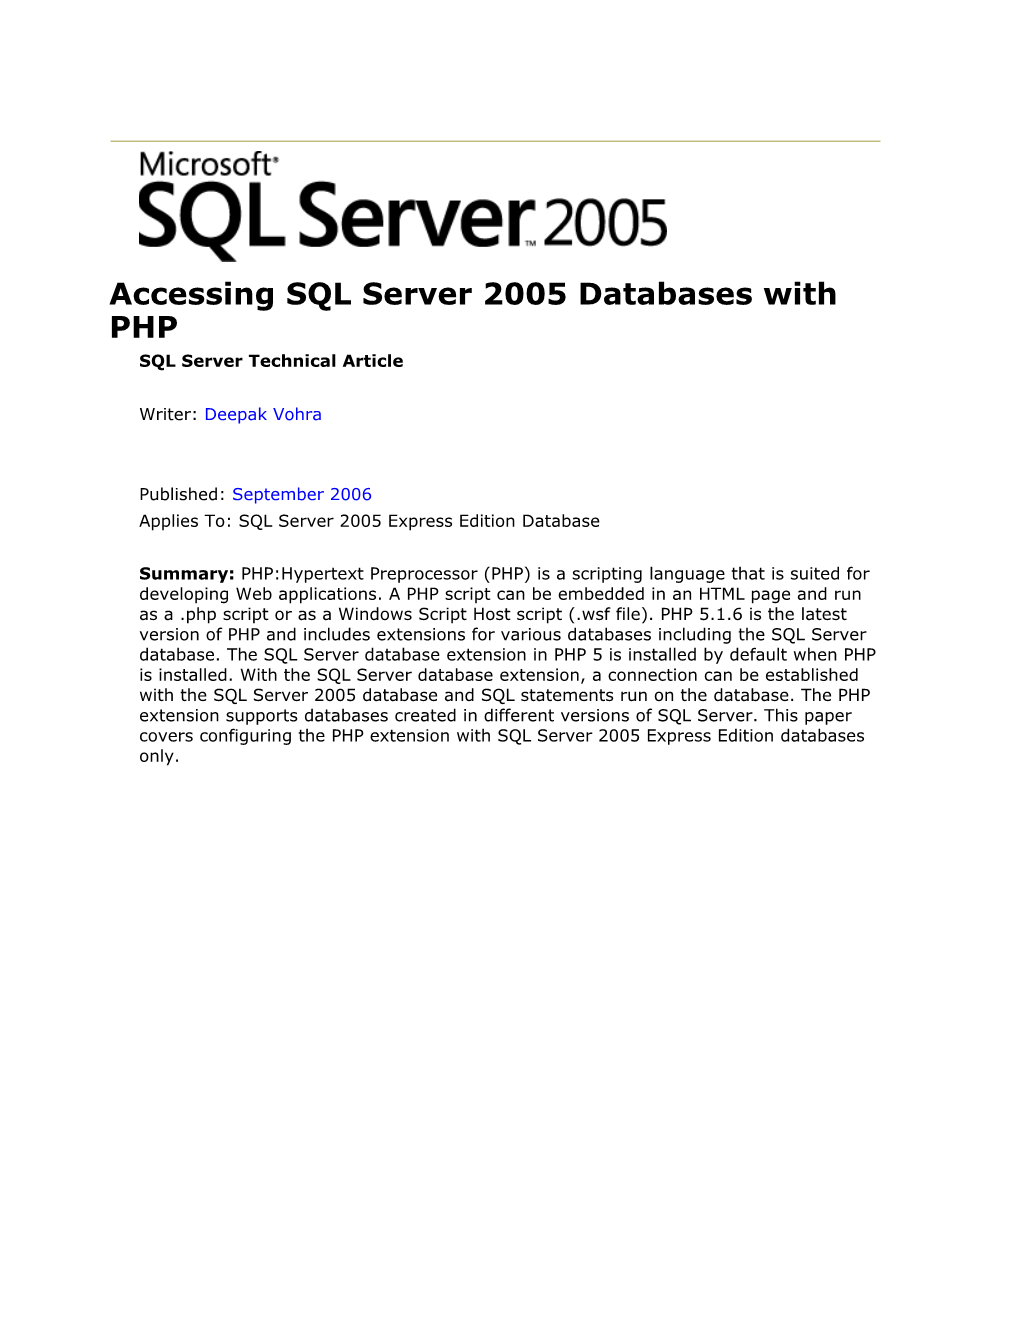 Accessing SQL Server 2005 Databases with PHP